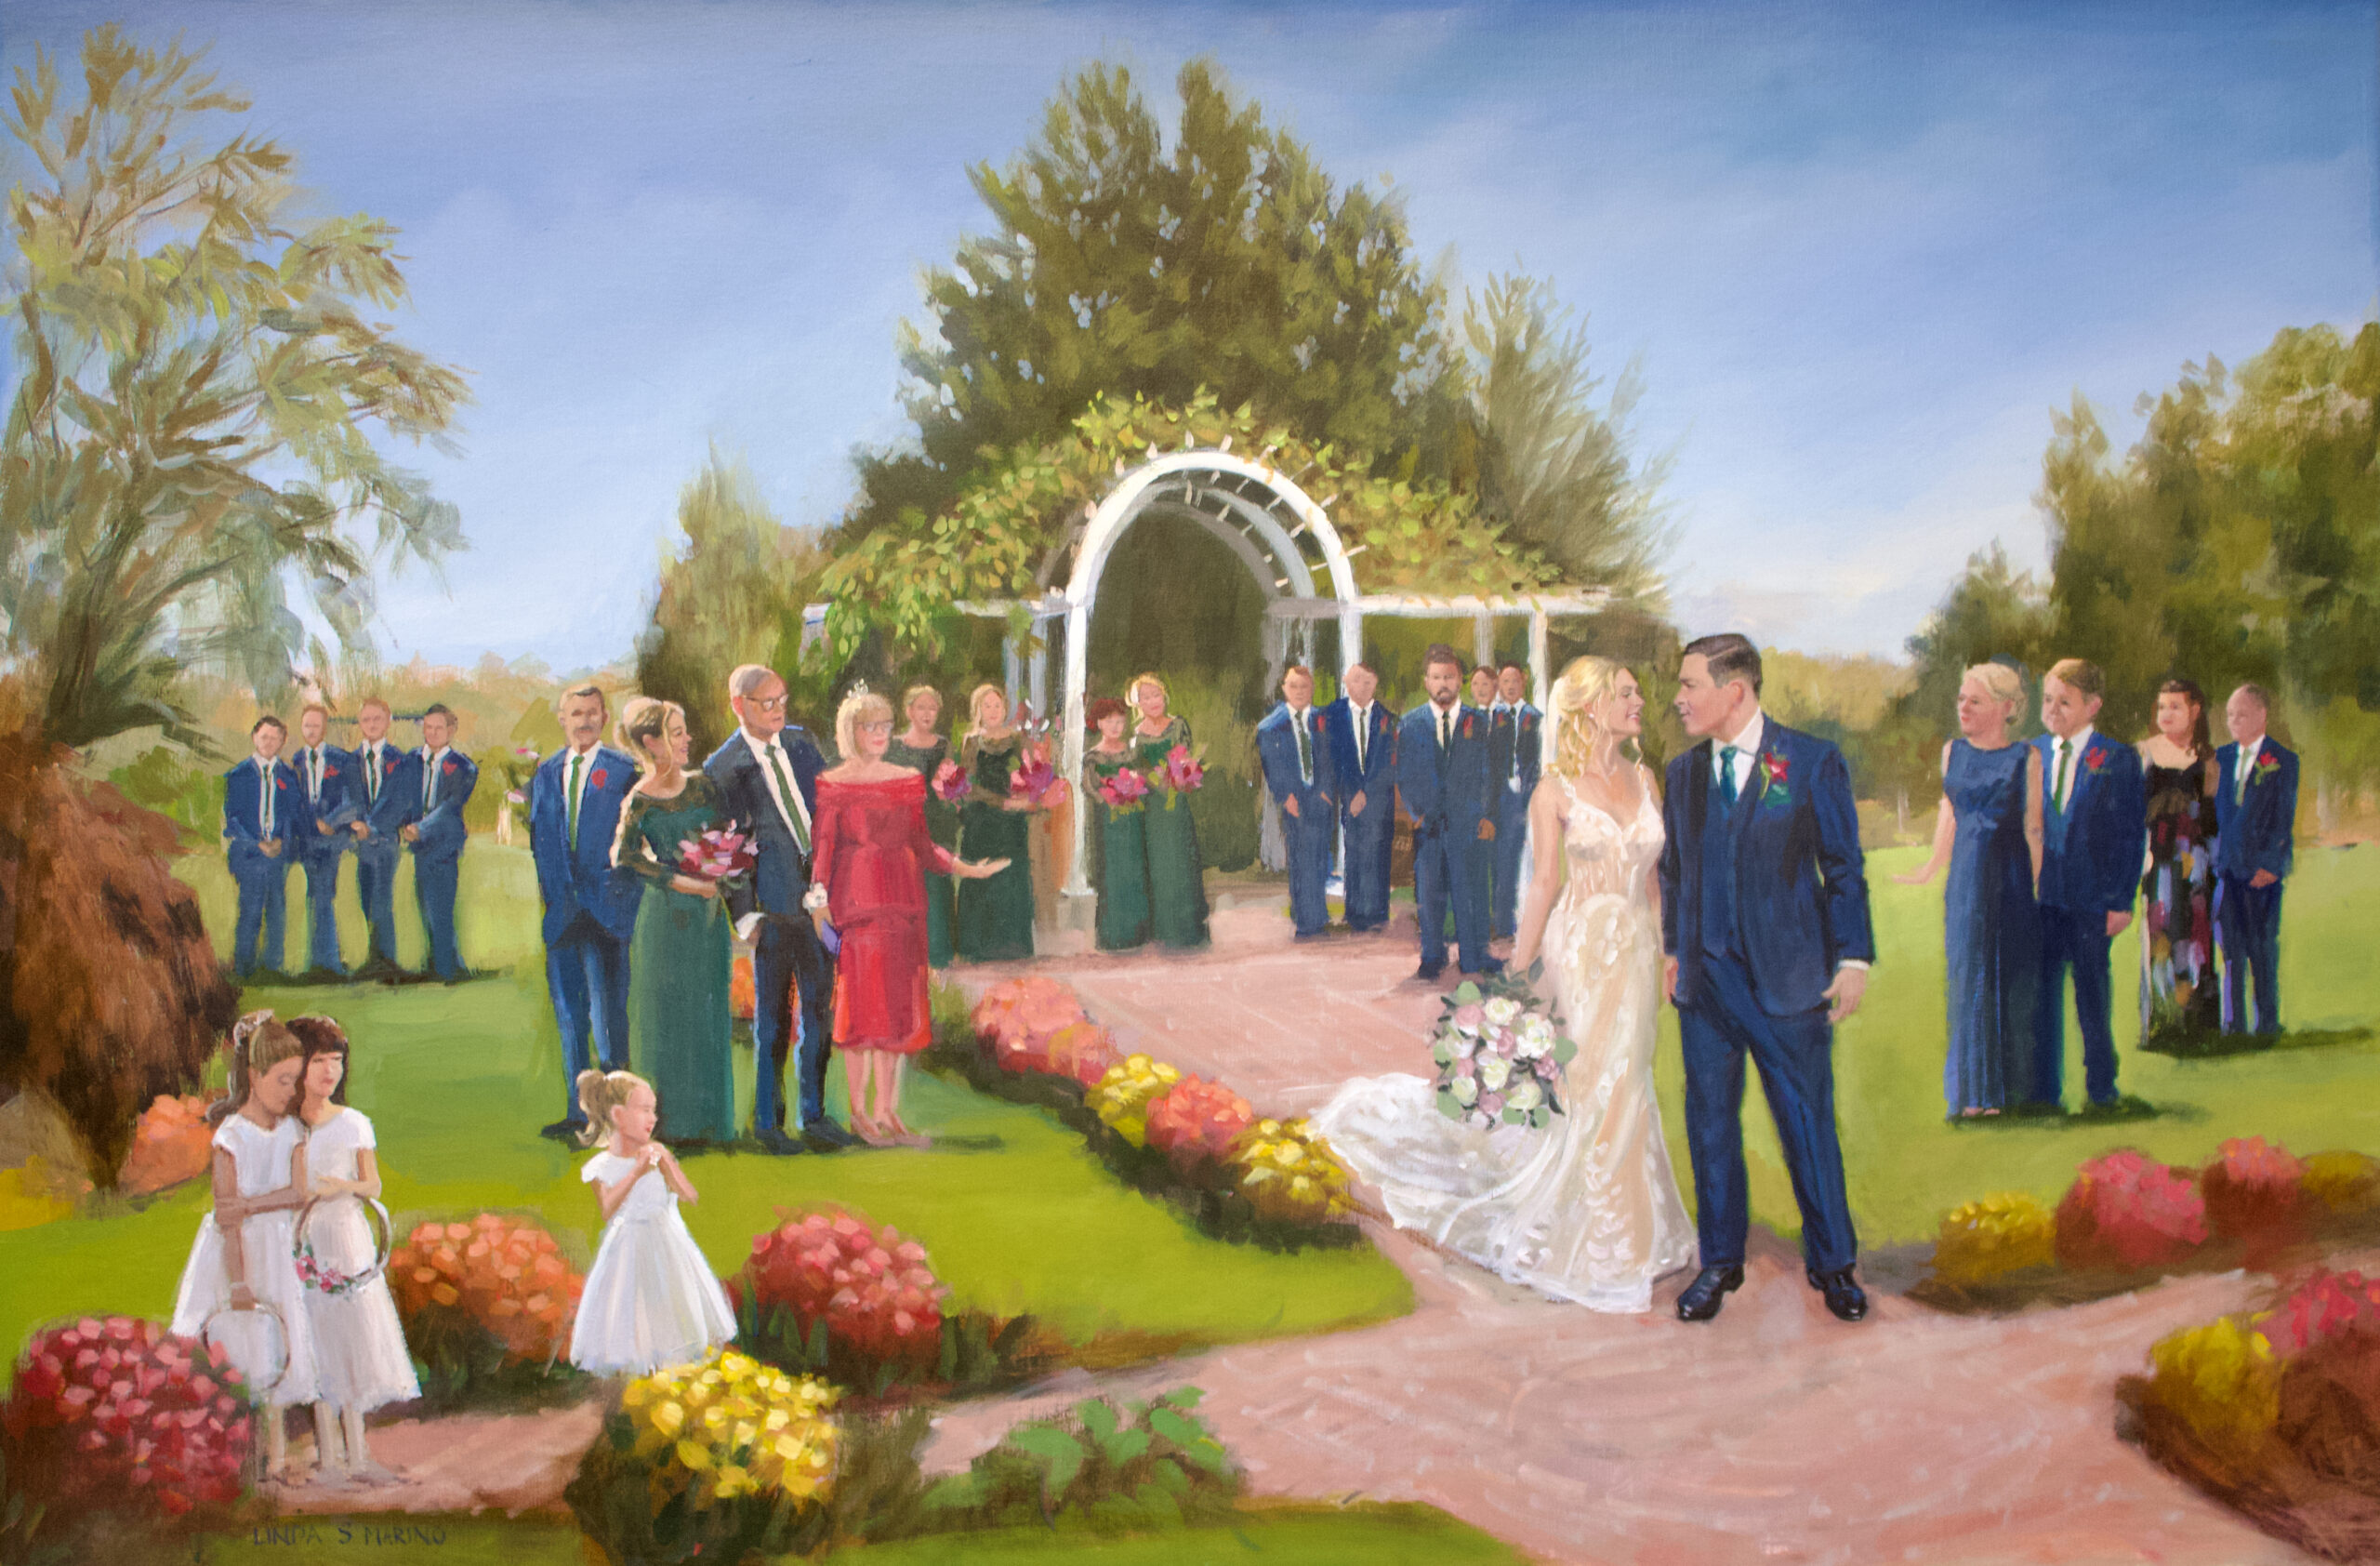 live painting at couples outdoor wedding ceremony at vineyard on long island, including family, wedding party and flower girls, by Linda Marino